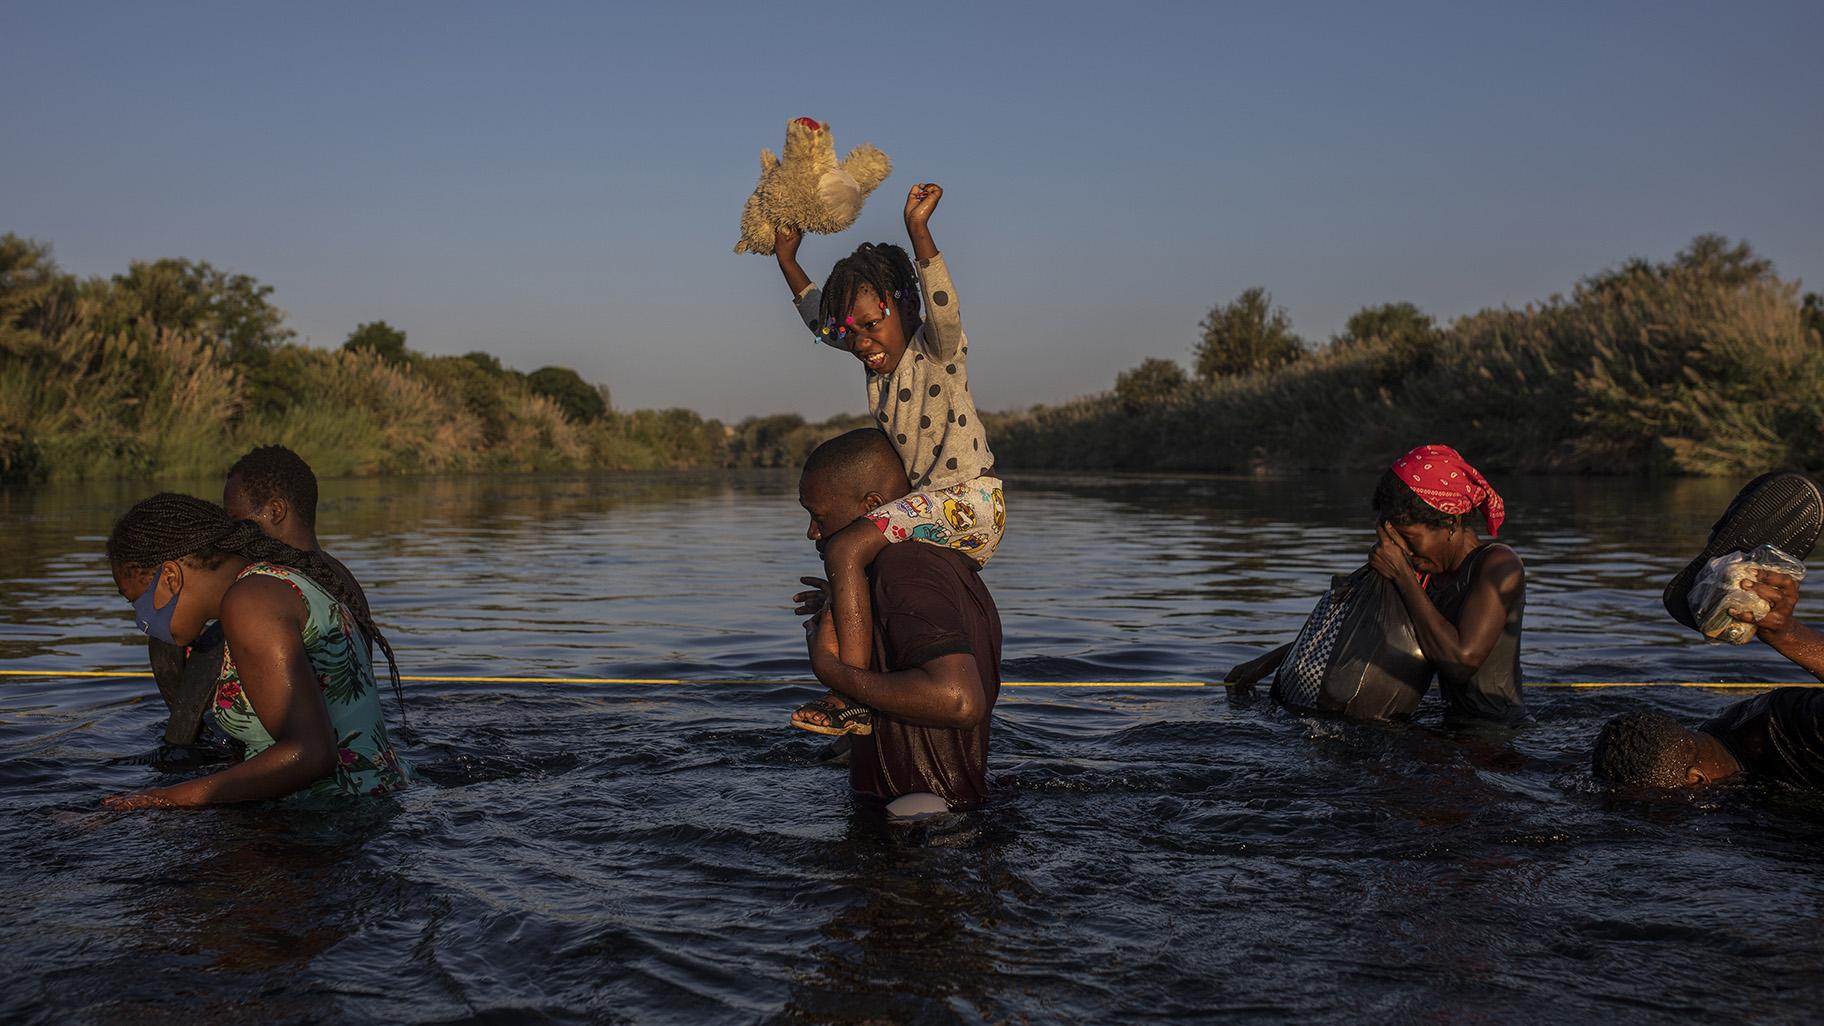 A little girl holds her stuffed animal high above the water as migrants, many from Haiti, wade across the Rio Grande river from Del Rio, Texas, to return to Ciudad Acuña, Mexico, Monday, Sept. 20, 2021, to avoid deportation. (AP Photo / Felix Marquez)